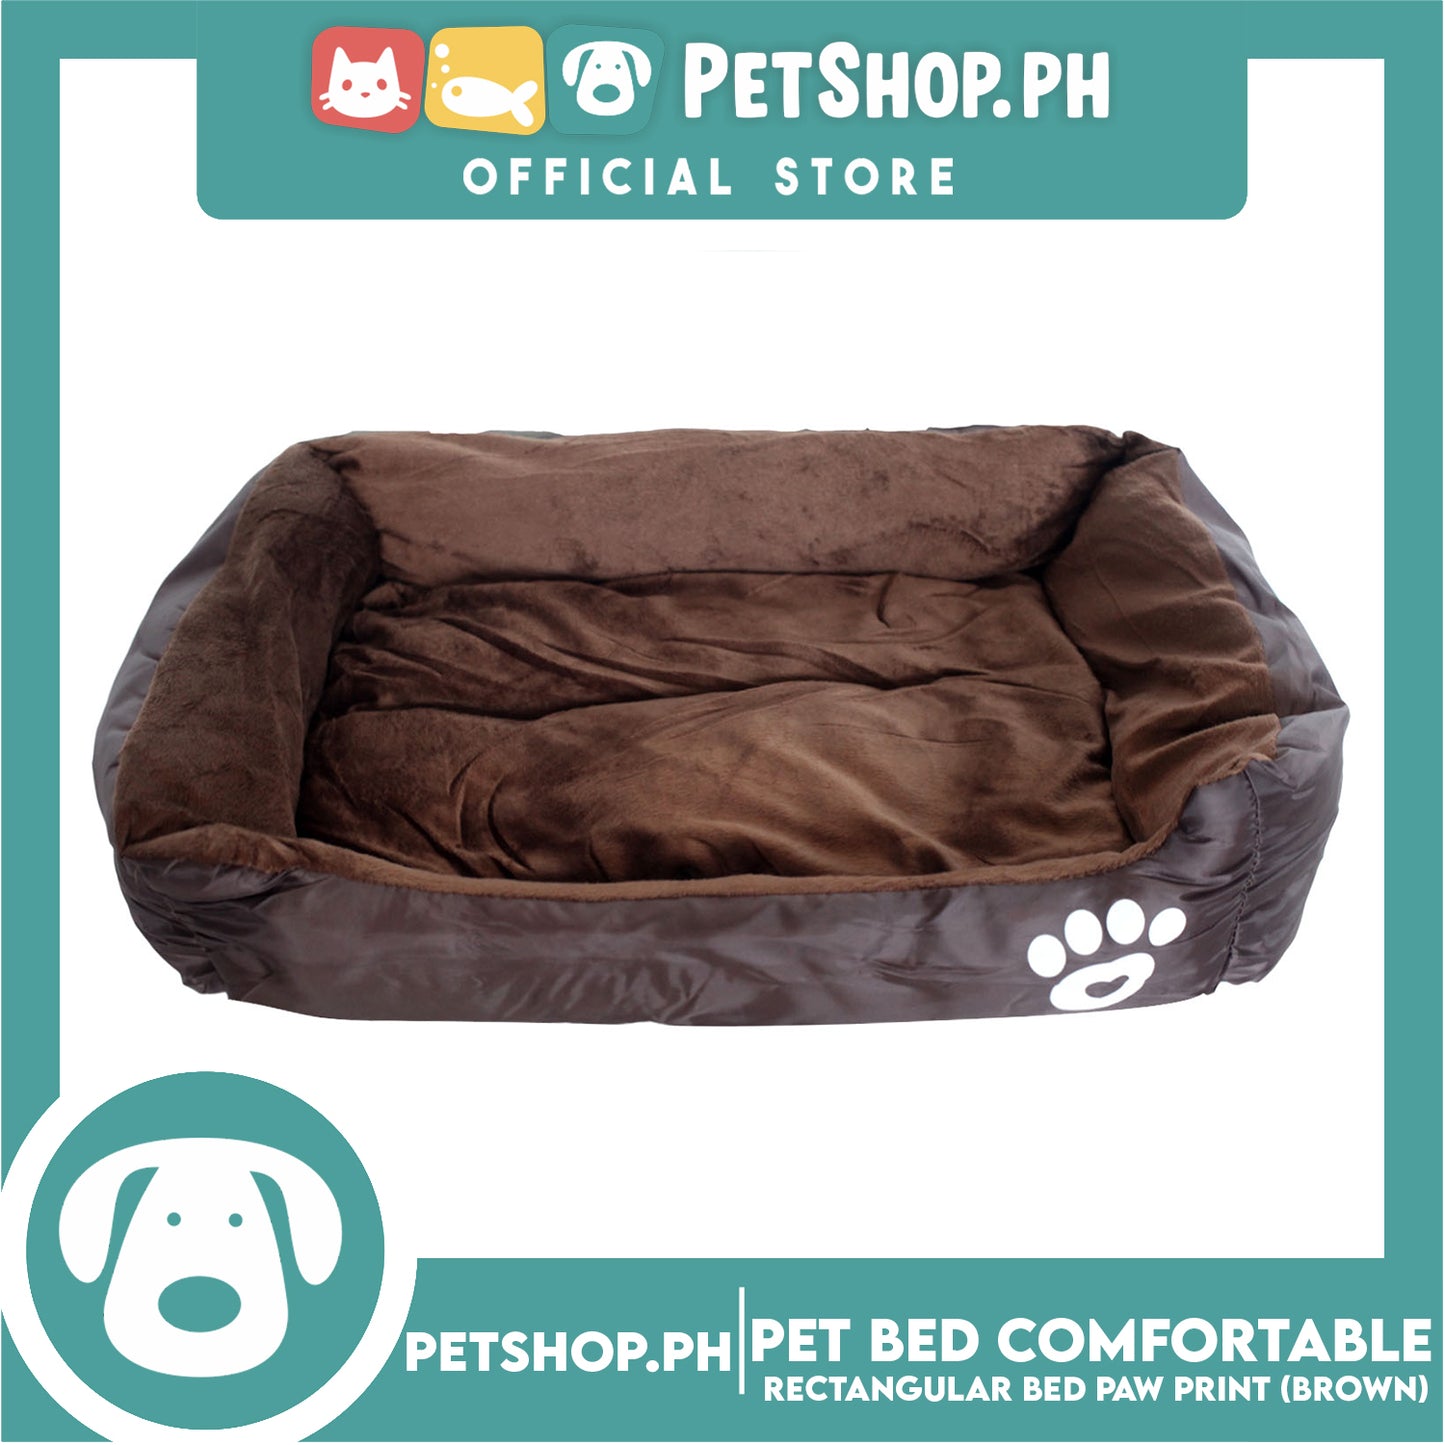 Pet Bed Comfortable Rectangular Pet Bed with Paw Print 62x50x12cm Medium for Dogs & Cats (Brown)